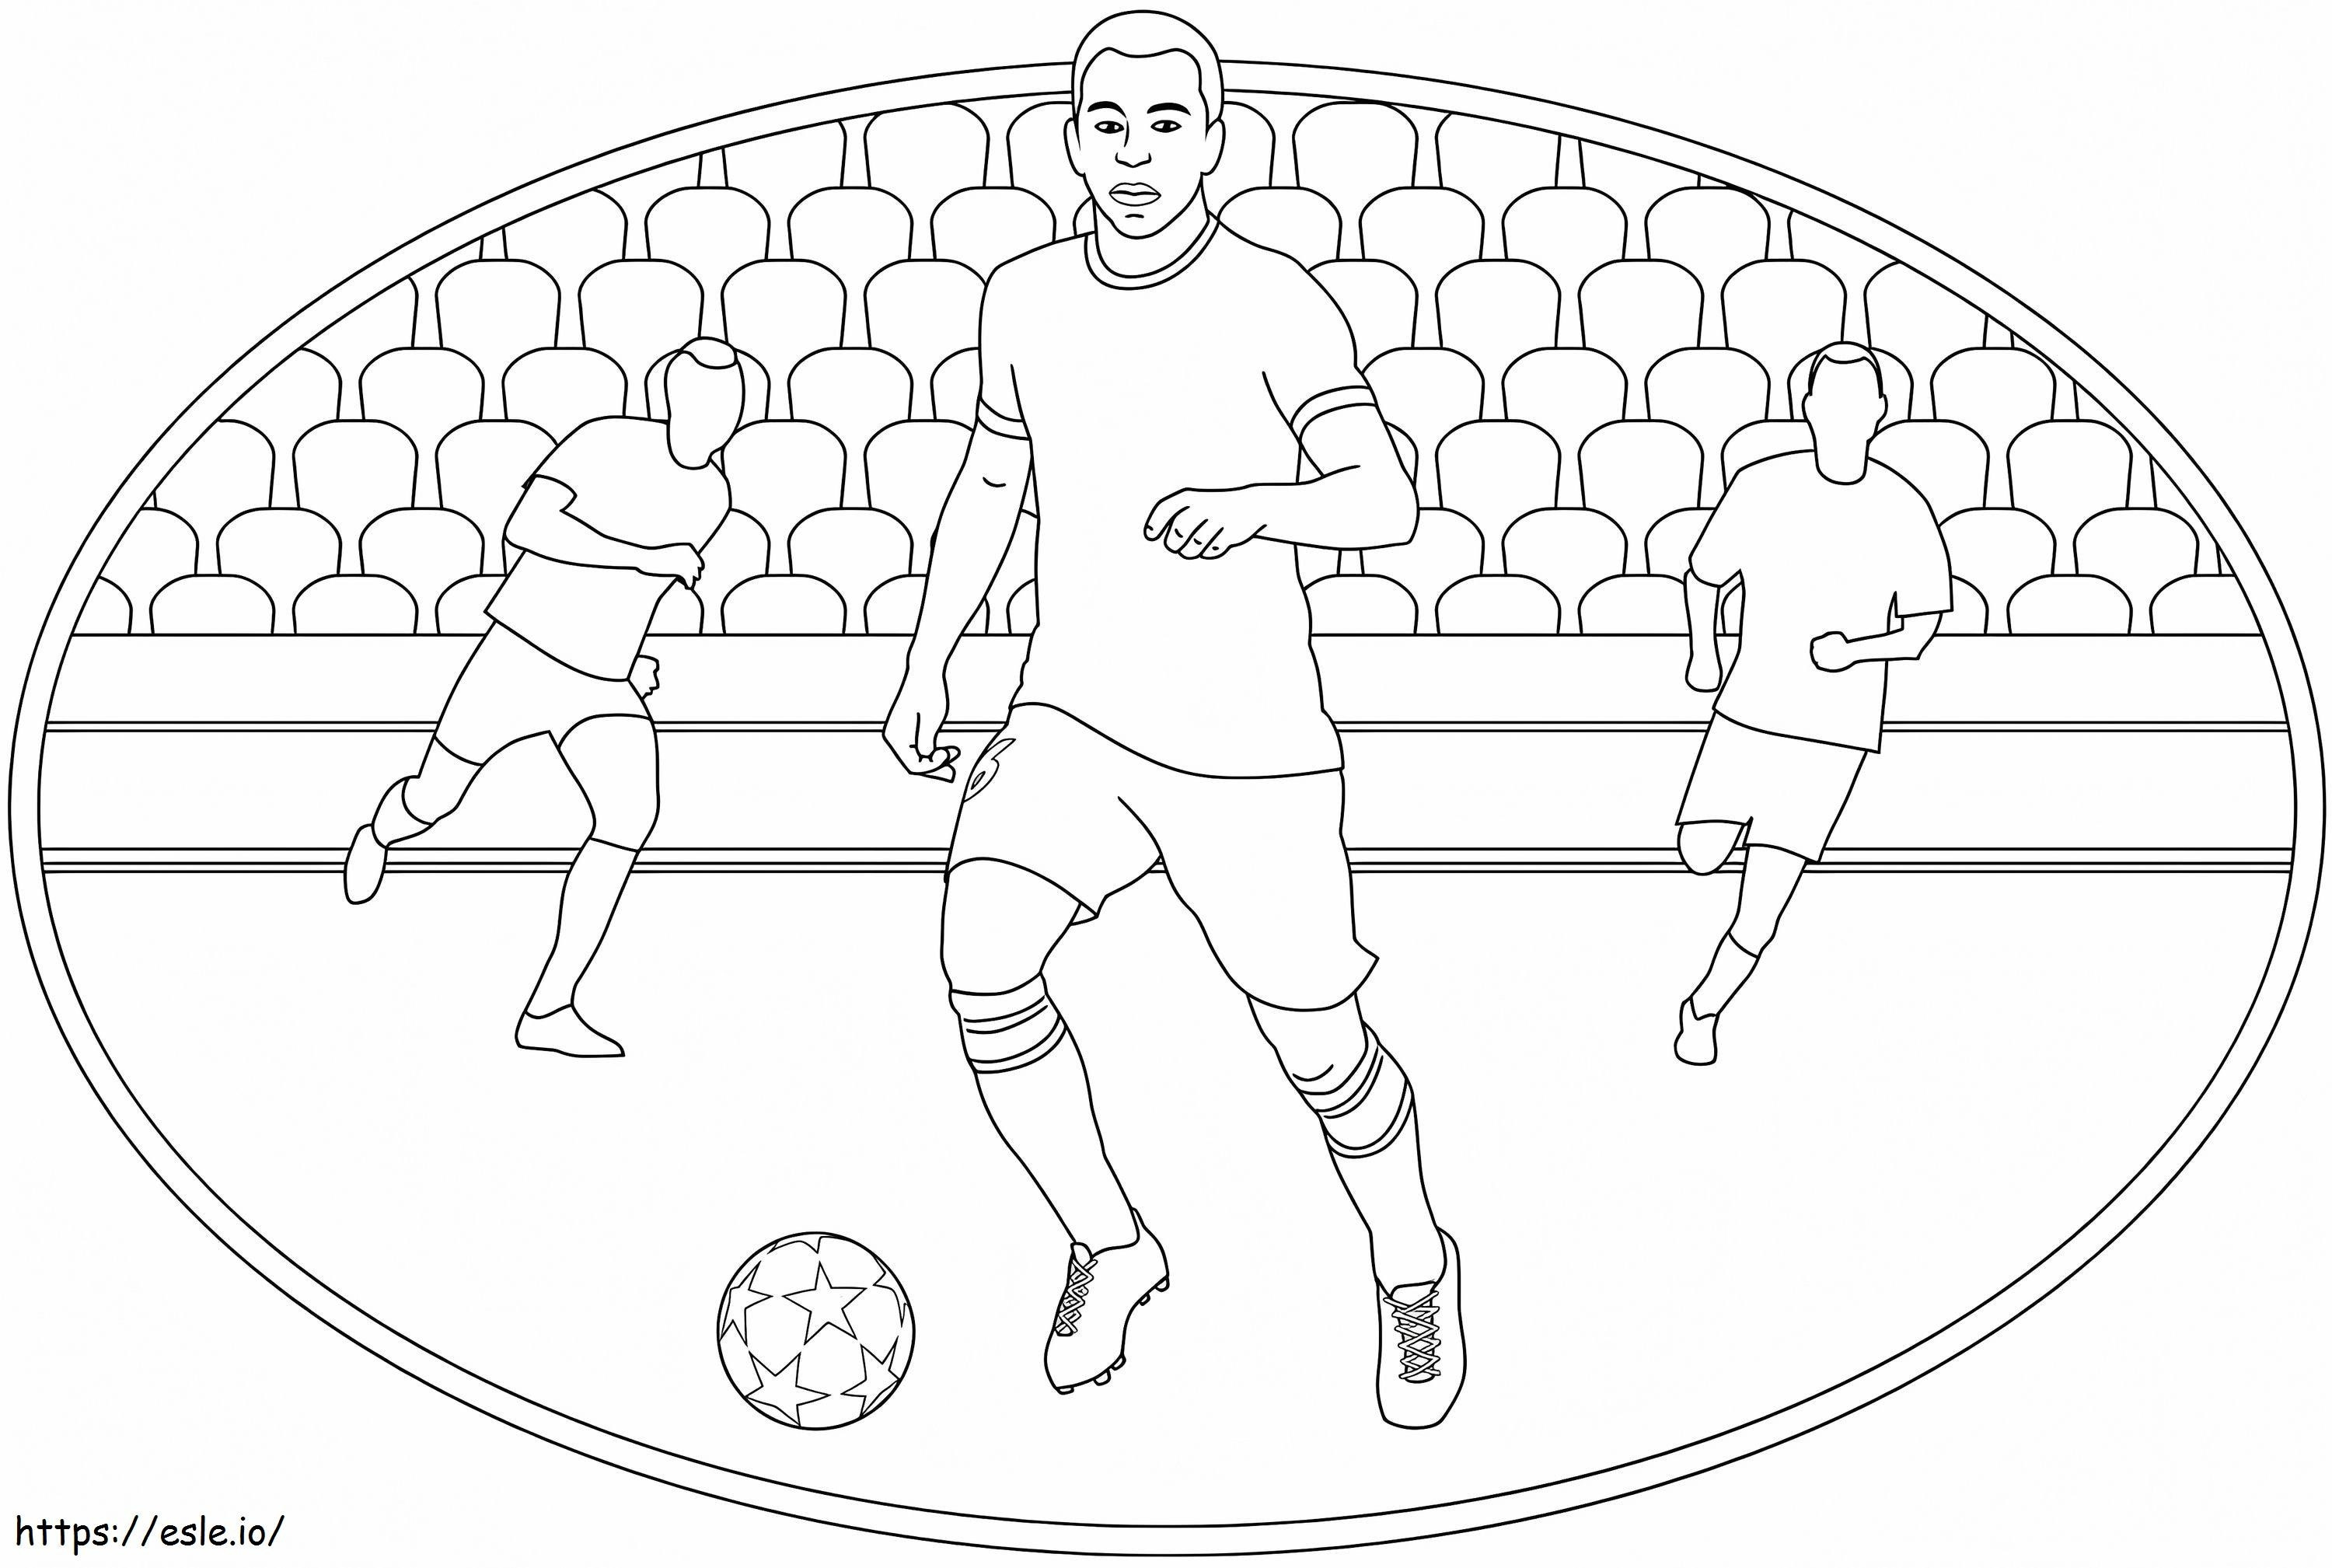 Three Soccer Players coloring page